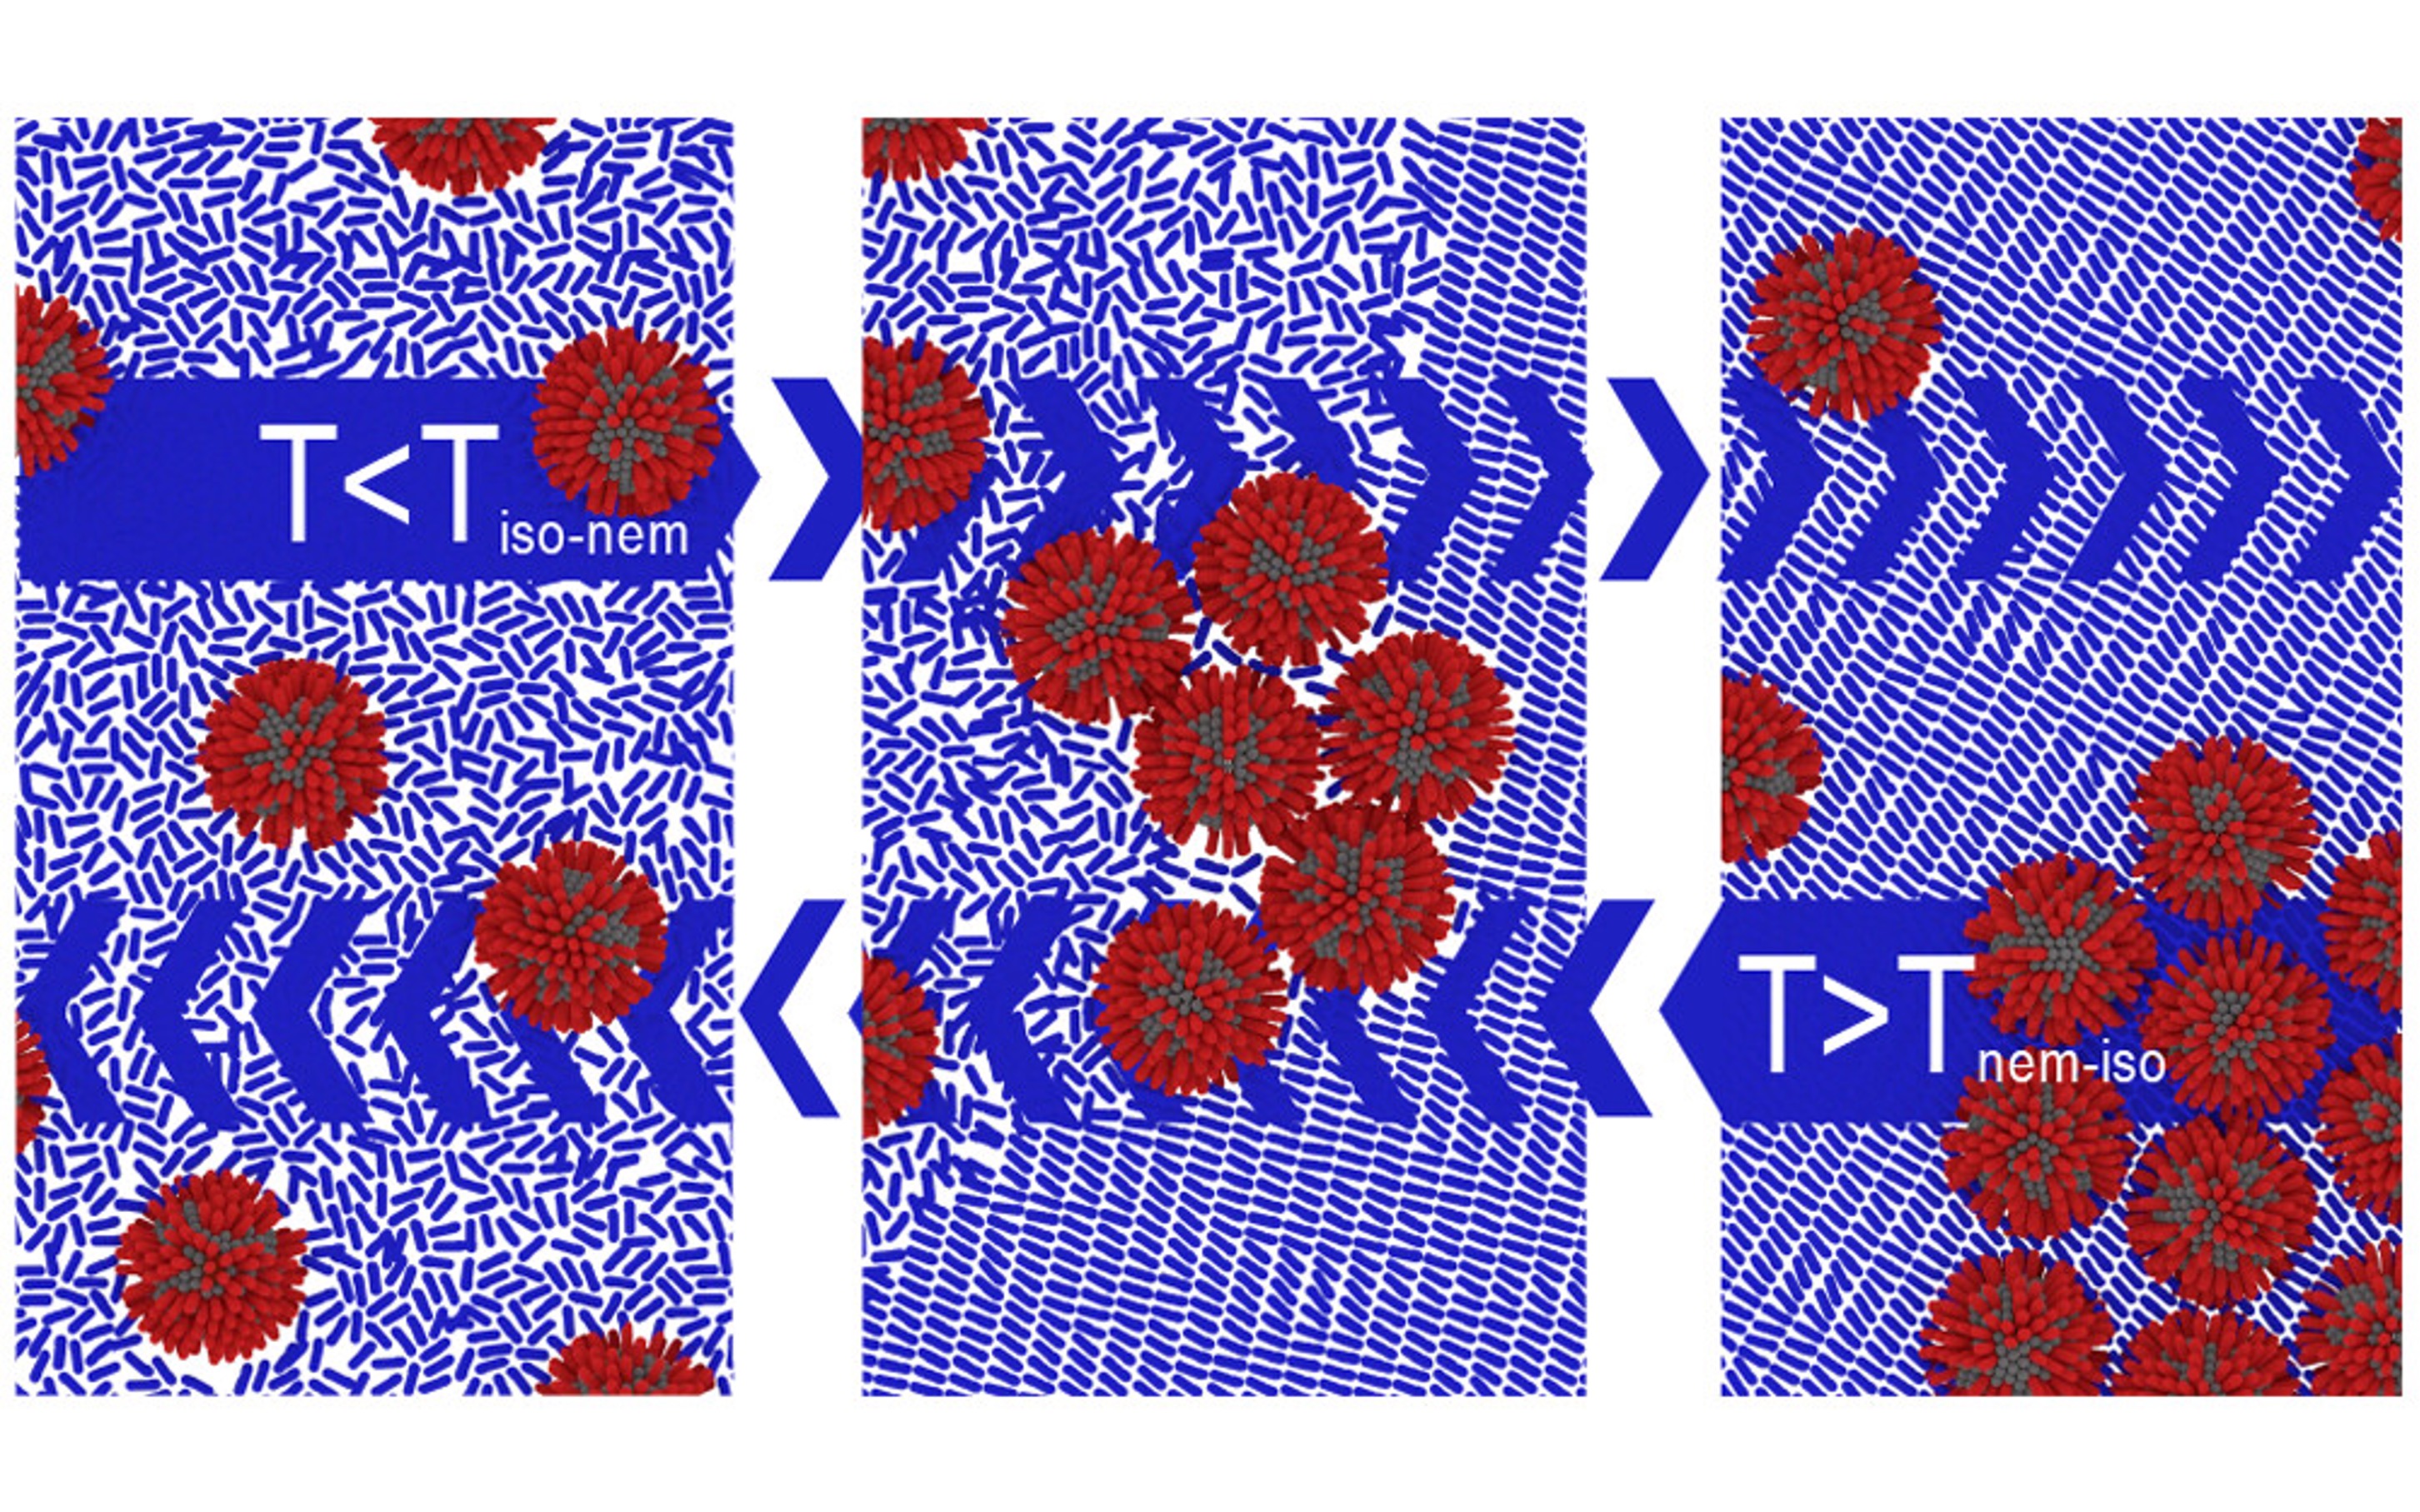 ToC schematic of Reversible Microscale Assembly of Nanoparticles Driven by the Phase Transition of a Thermotropic Liquid Crystal